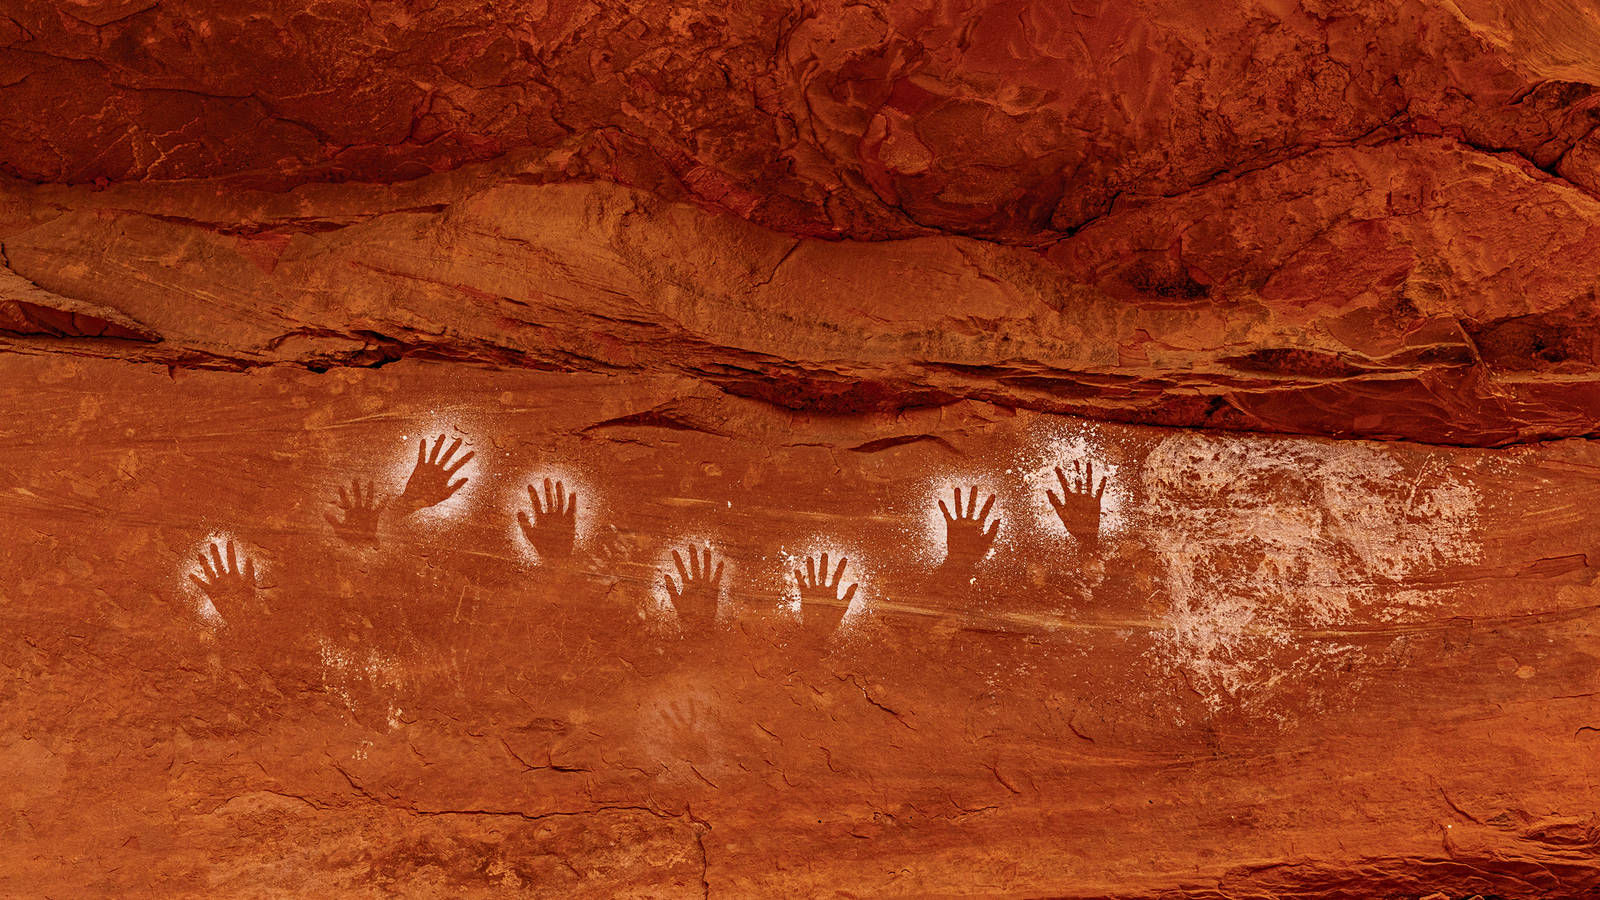 <h3 style="text-align: center; padding: 50px;"><span class="text-Intro-style">These painted outlines of human hands are in an area of Bears Ears that the Trump administration removed from the monument — illegally, according to NPCA. “I love handprints because they’re so personal,” Alvarez said. “I think of them as self-portraits ... Even looking at them on the screen, I can’t resist <br />holding my hand up to see how my hand compares.” © STEPHEN ALVAREZ</span></h3>